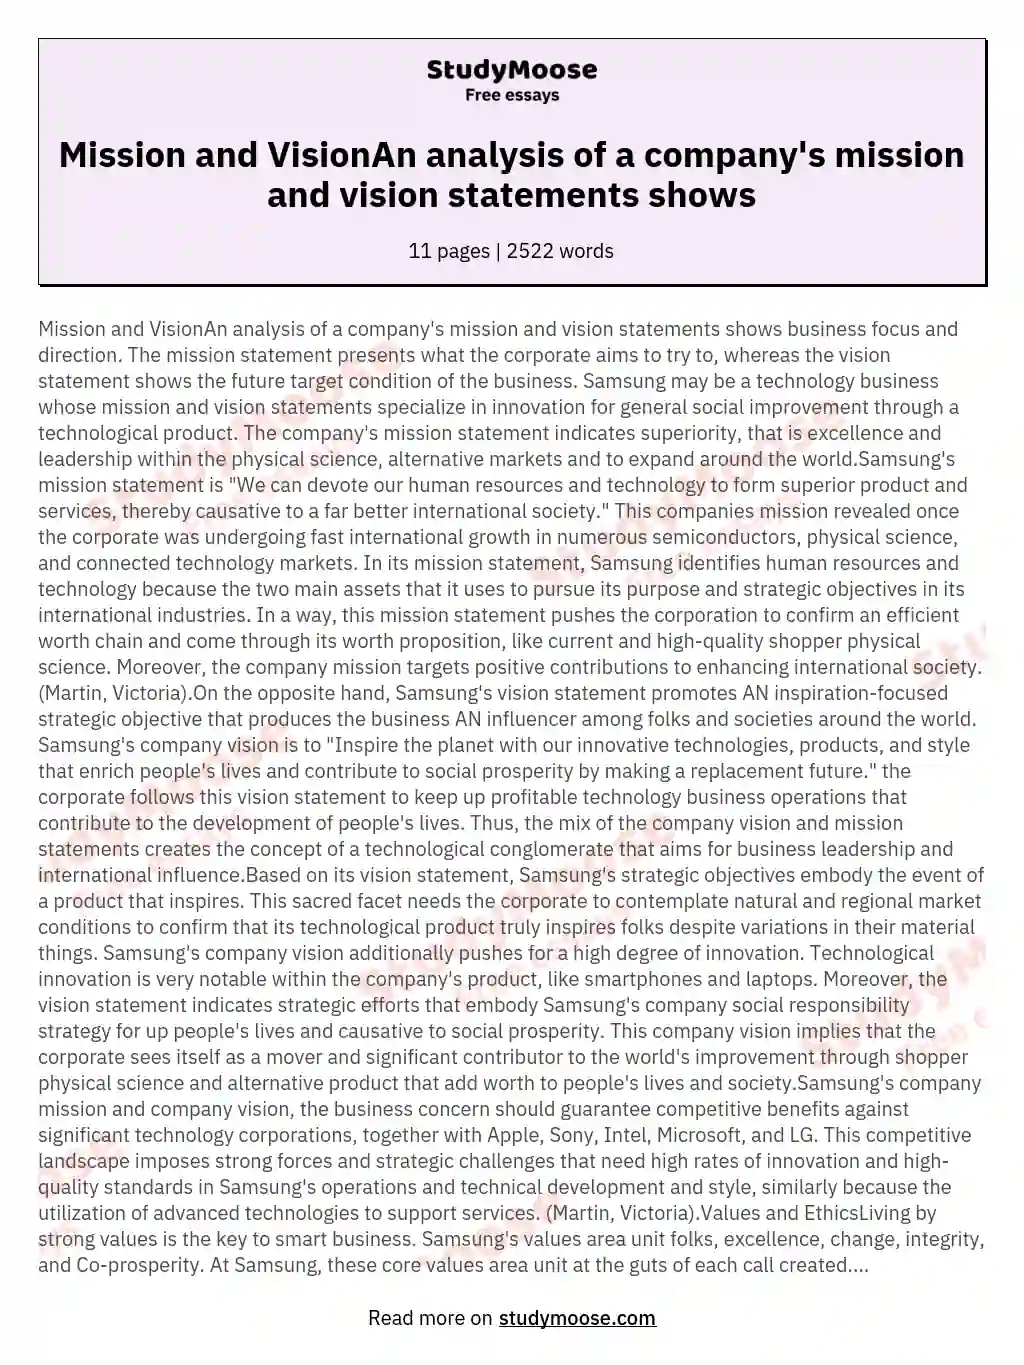 Mission and VisionAn analysis of a company's mission and vision statements shows essay